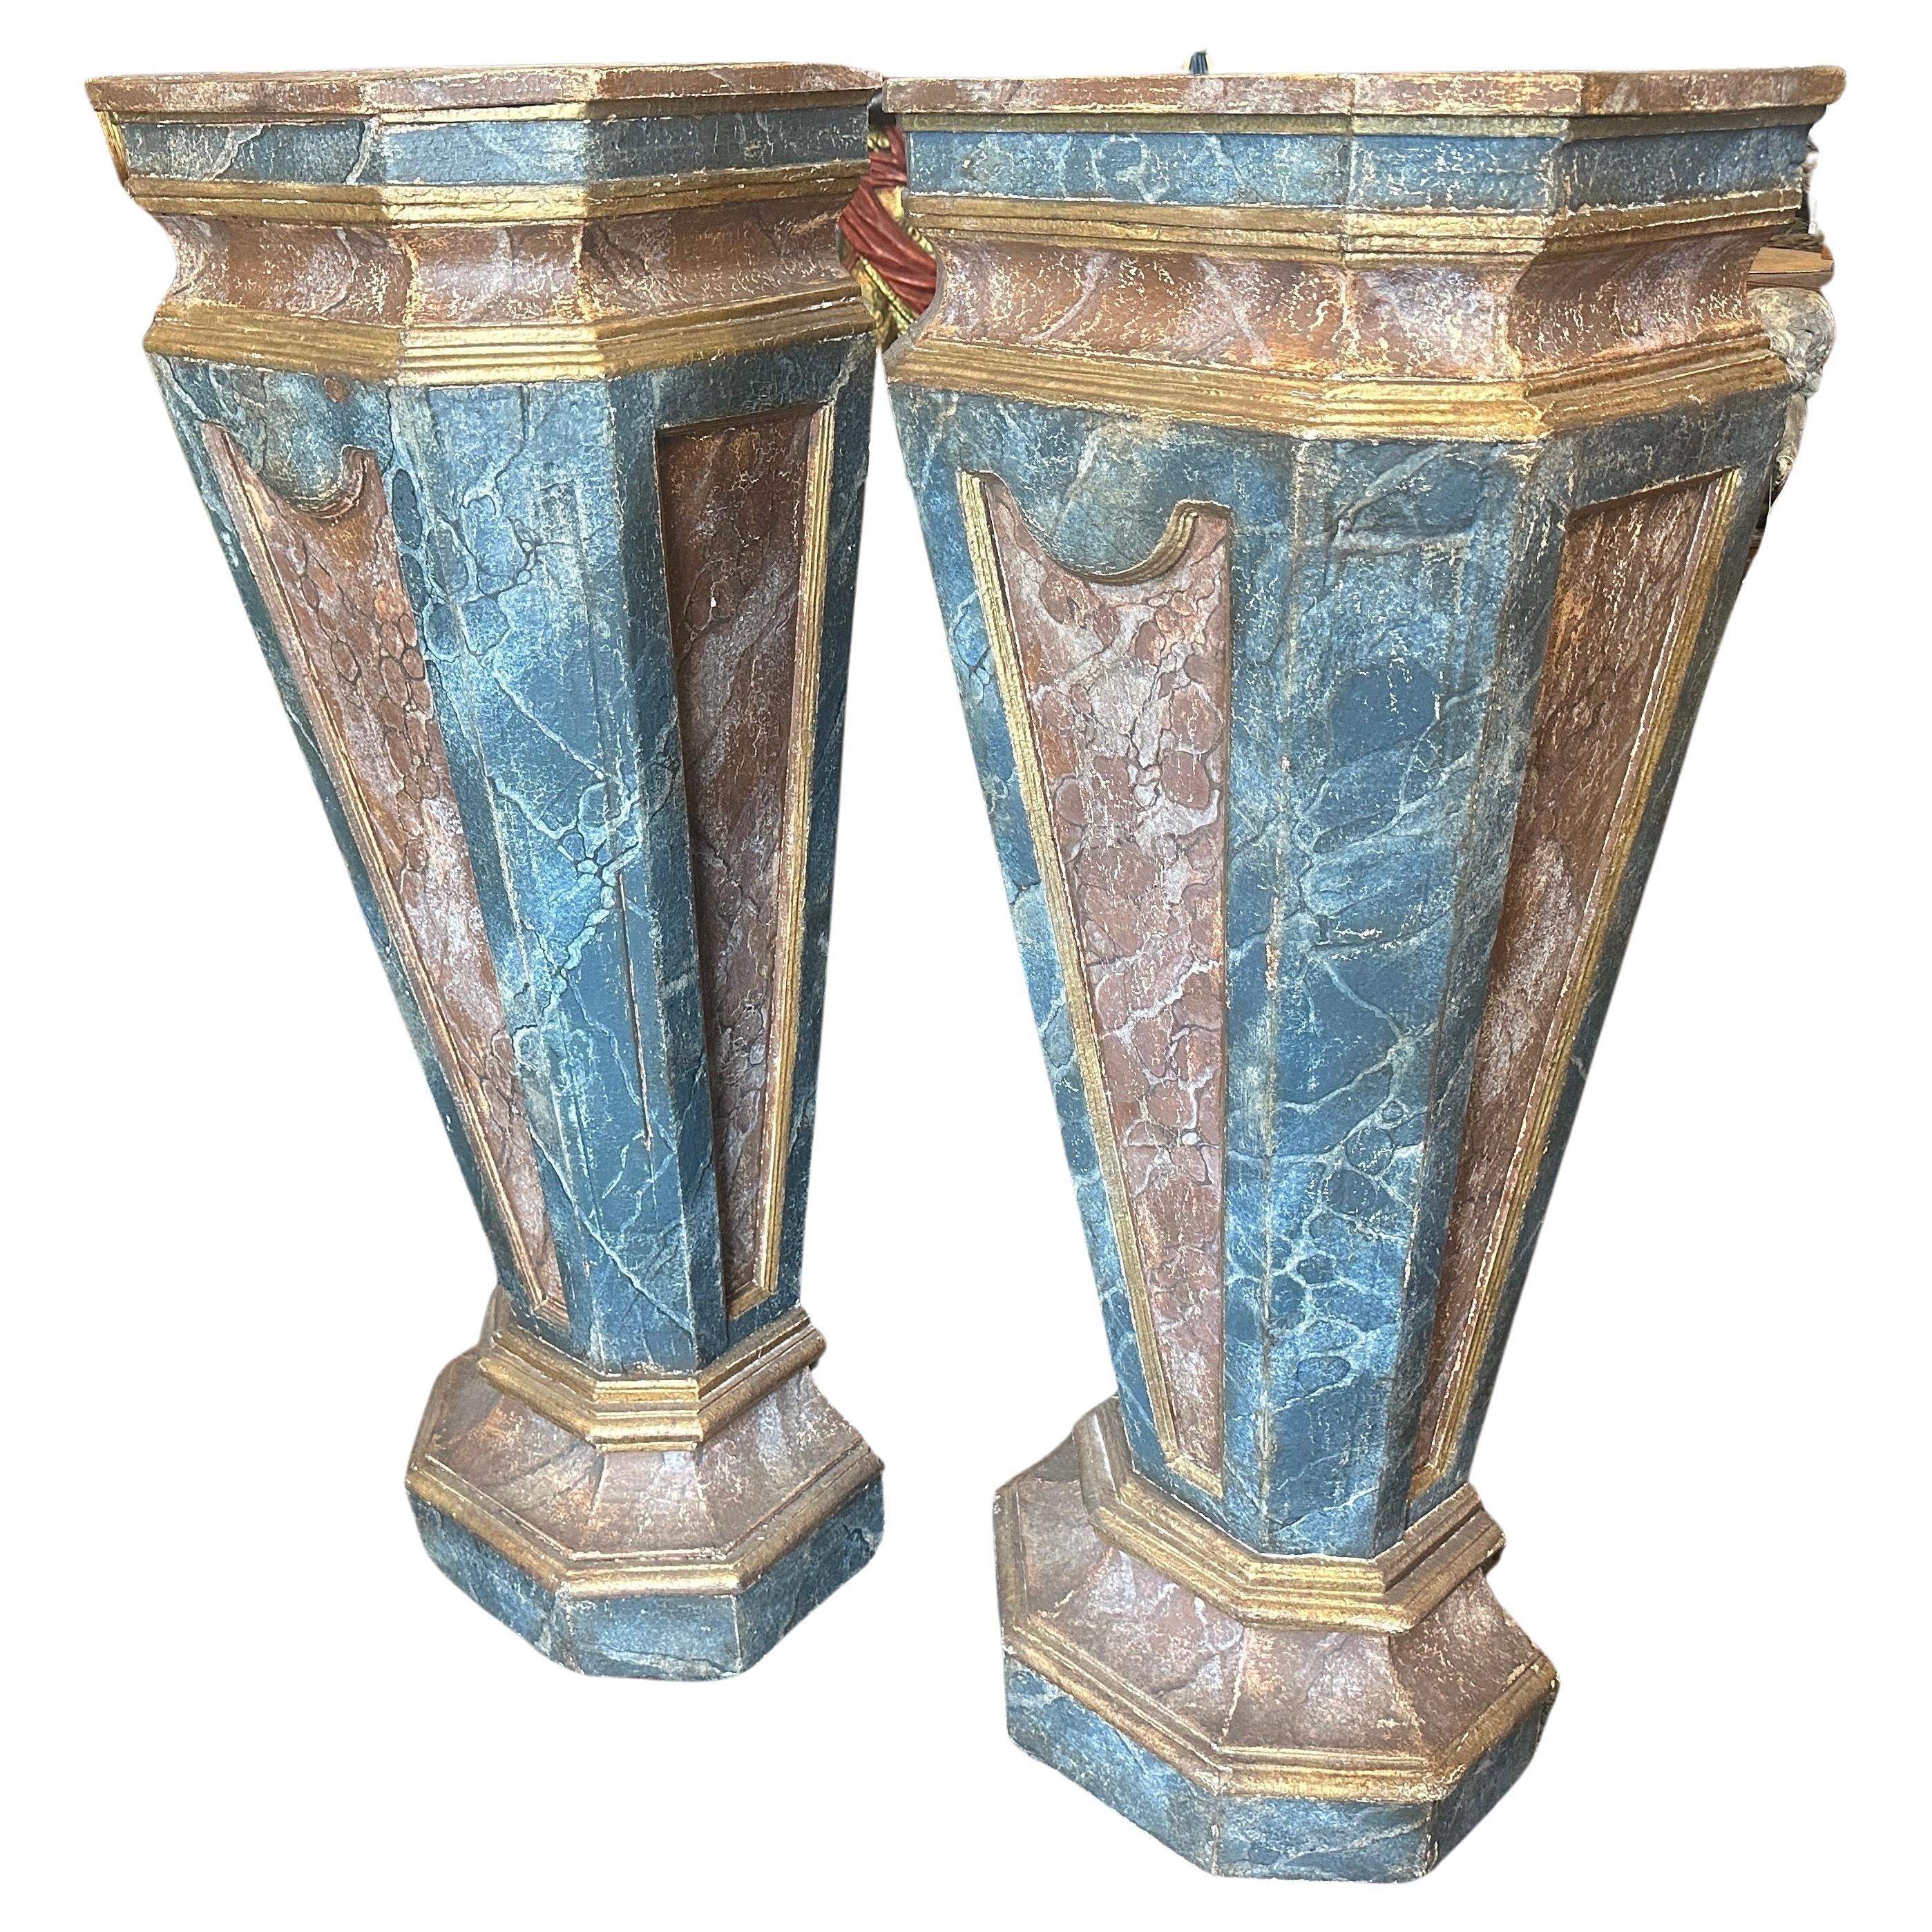 Two Blue, brown and gold lacquered wood columns hand-crafted in Italy in late 19th century, they were in a noble Sicilian palace at the four corners of a large hall, there are 4 columns available and they are sold in pairs. They exhibit